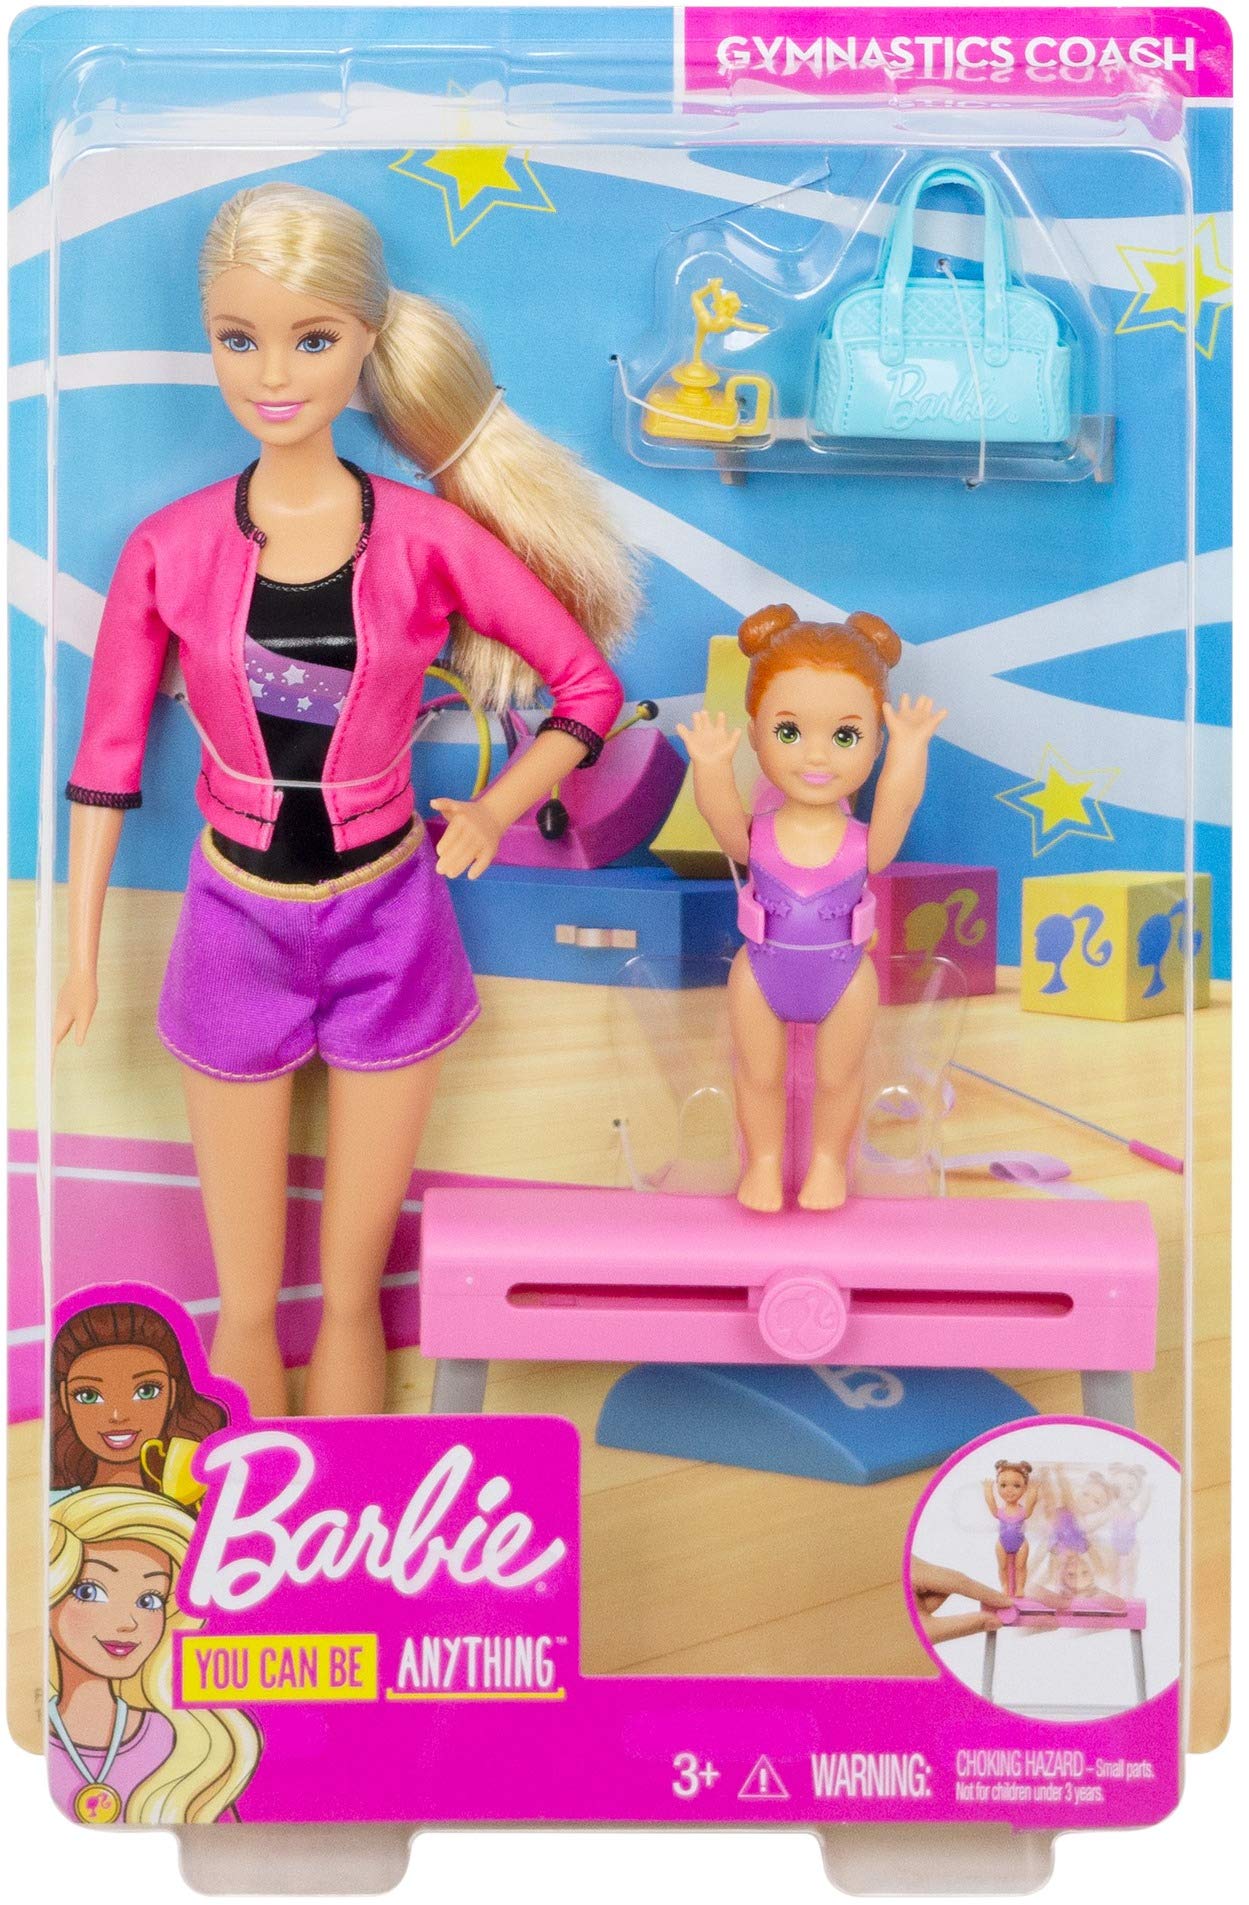 Barbie Gymnastics Coach Dolls & Playset with Blonde Coach Barbie Doll, Brunette Small Doll and Balance Beam with Sliding Mechanism, Gift for 3 to 7 Year Olds [Amazon Exclusive]